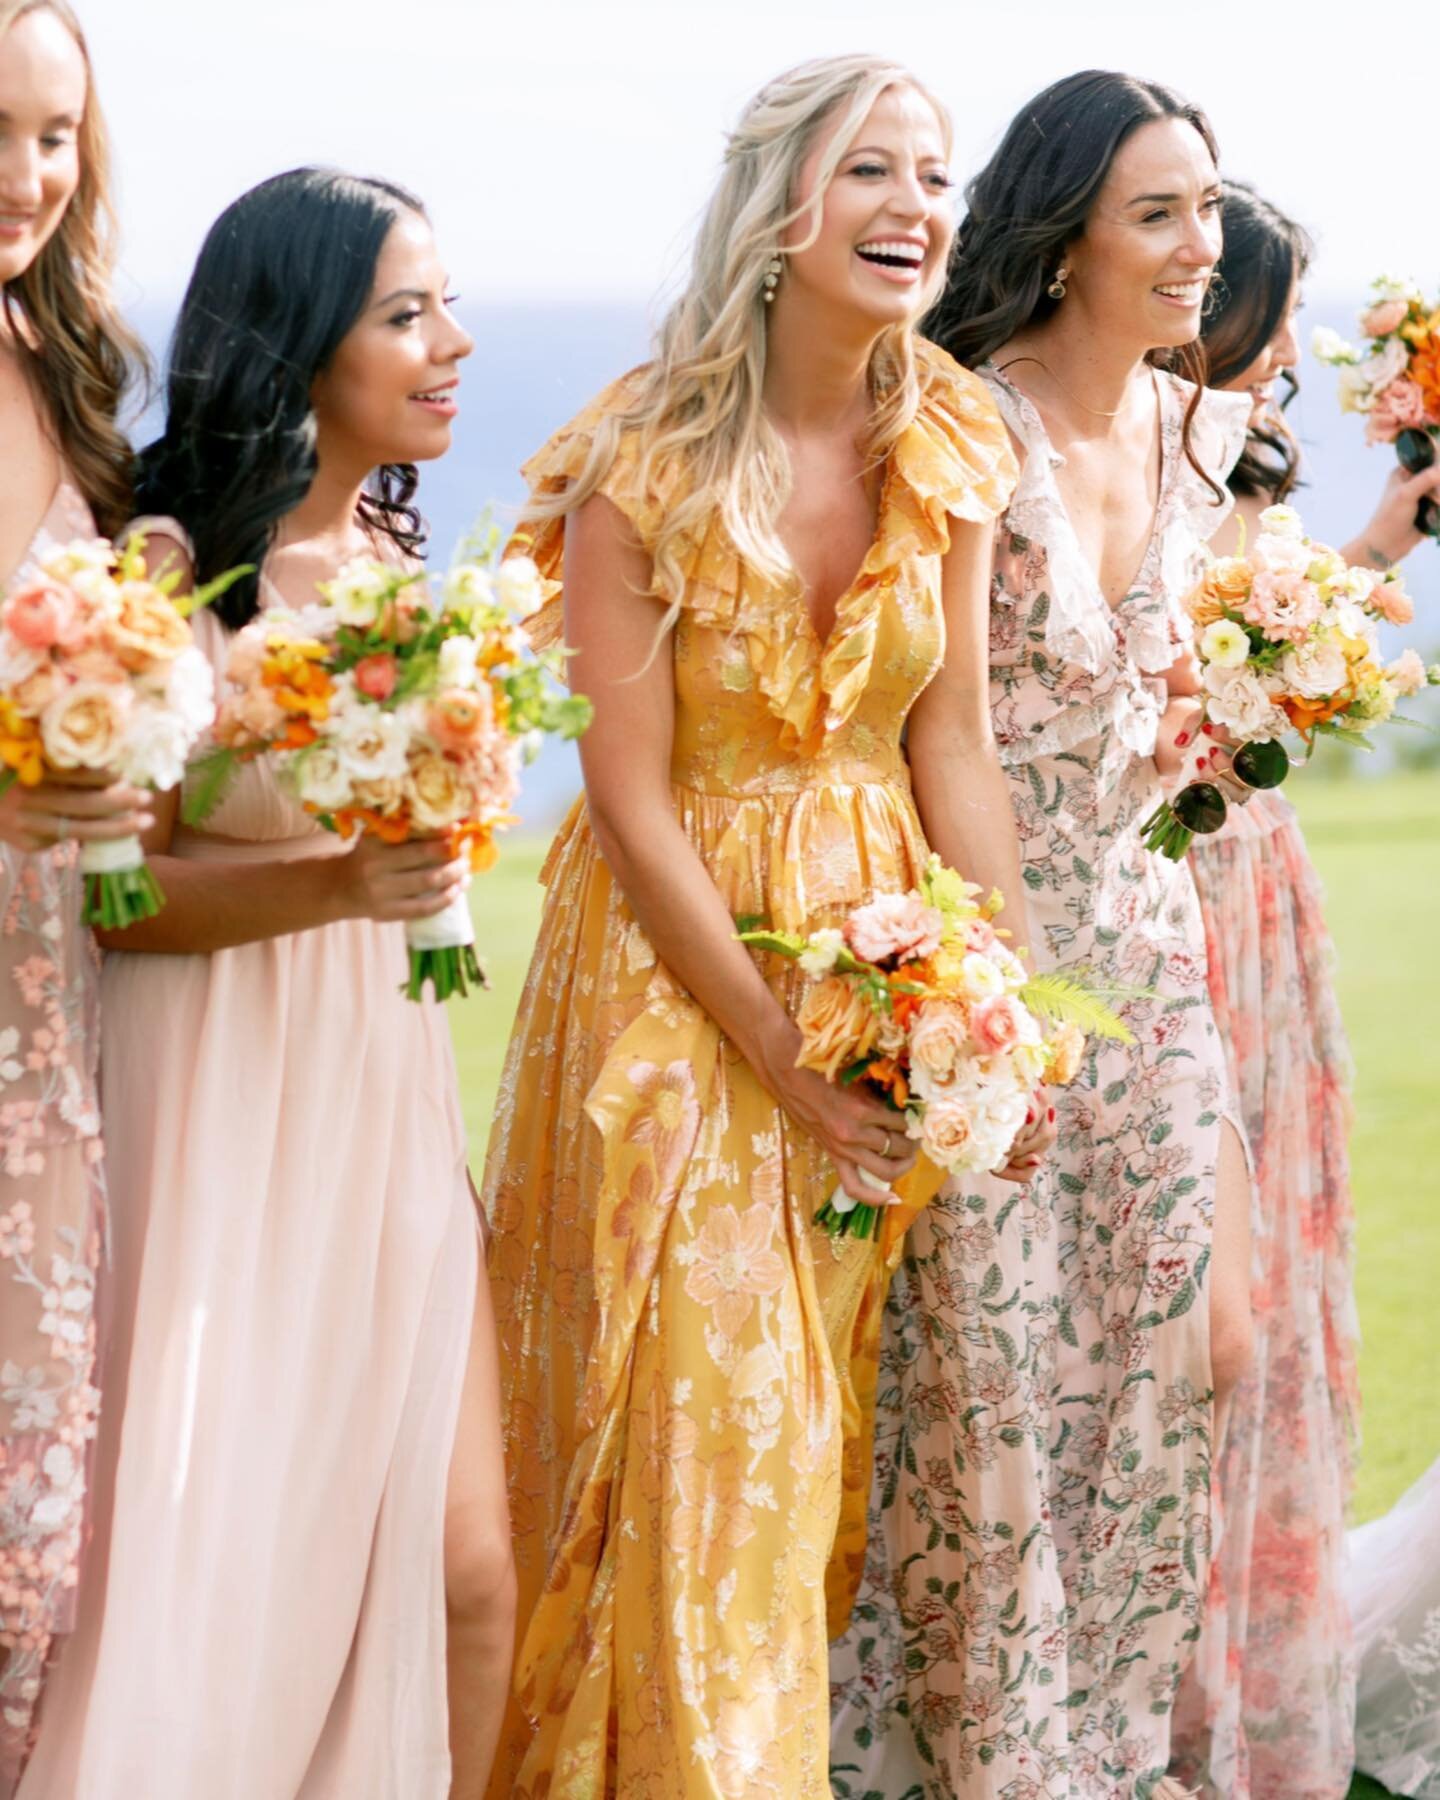 Mix and match bridesmaid looks call for bundles of blooming florals in feminine, spring hues. Photography by @ashleygoodwinphoto with @ked_and_co at @fslanai